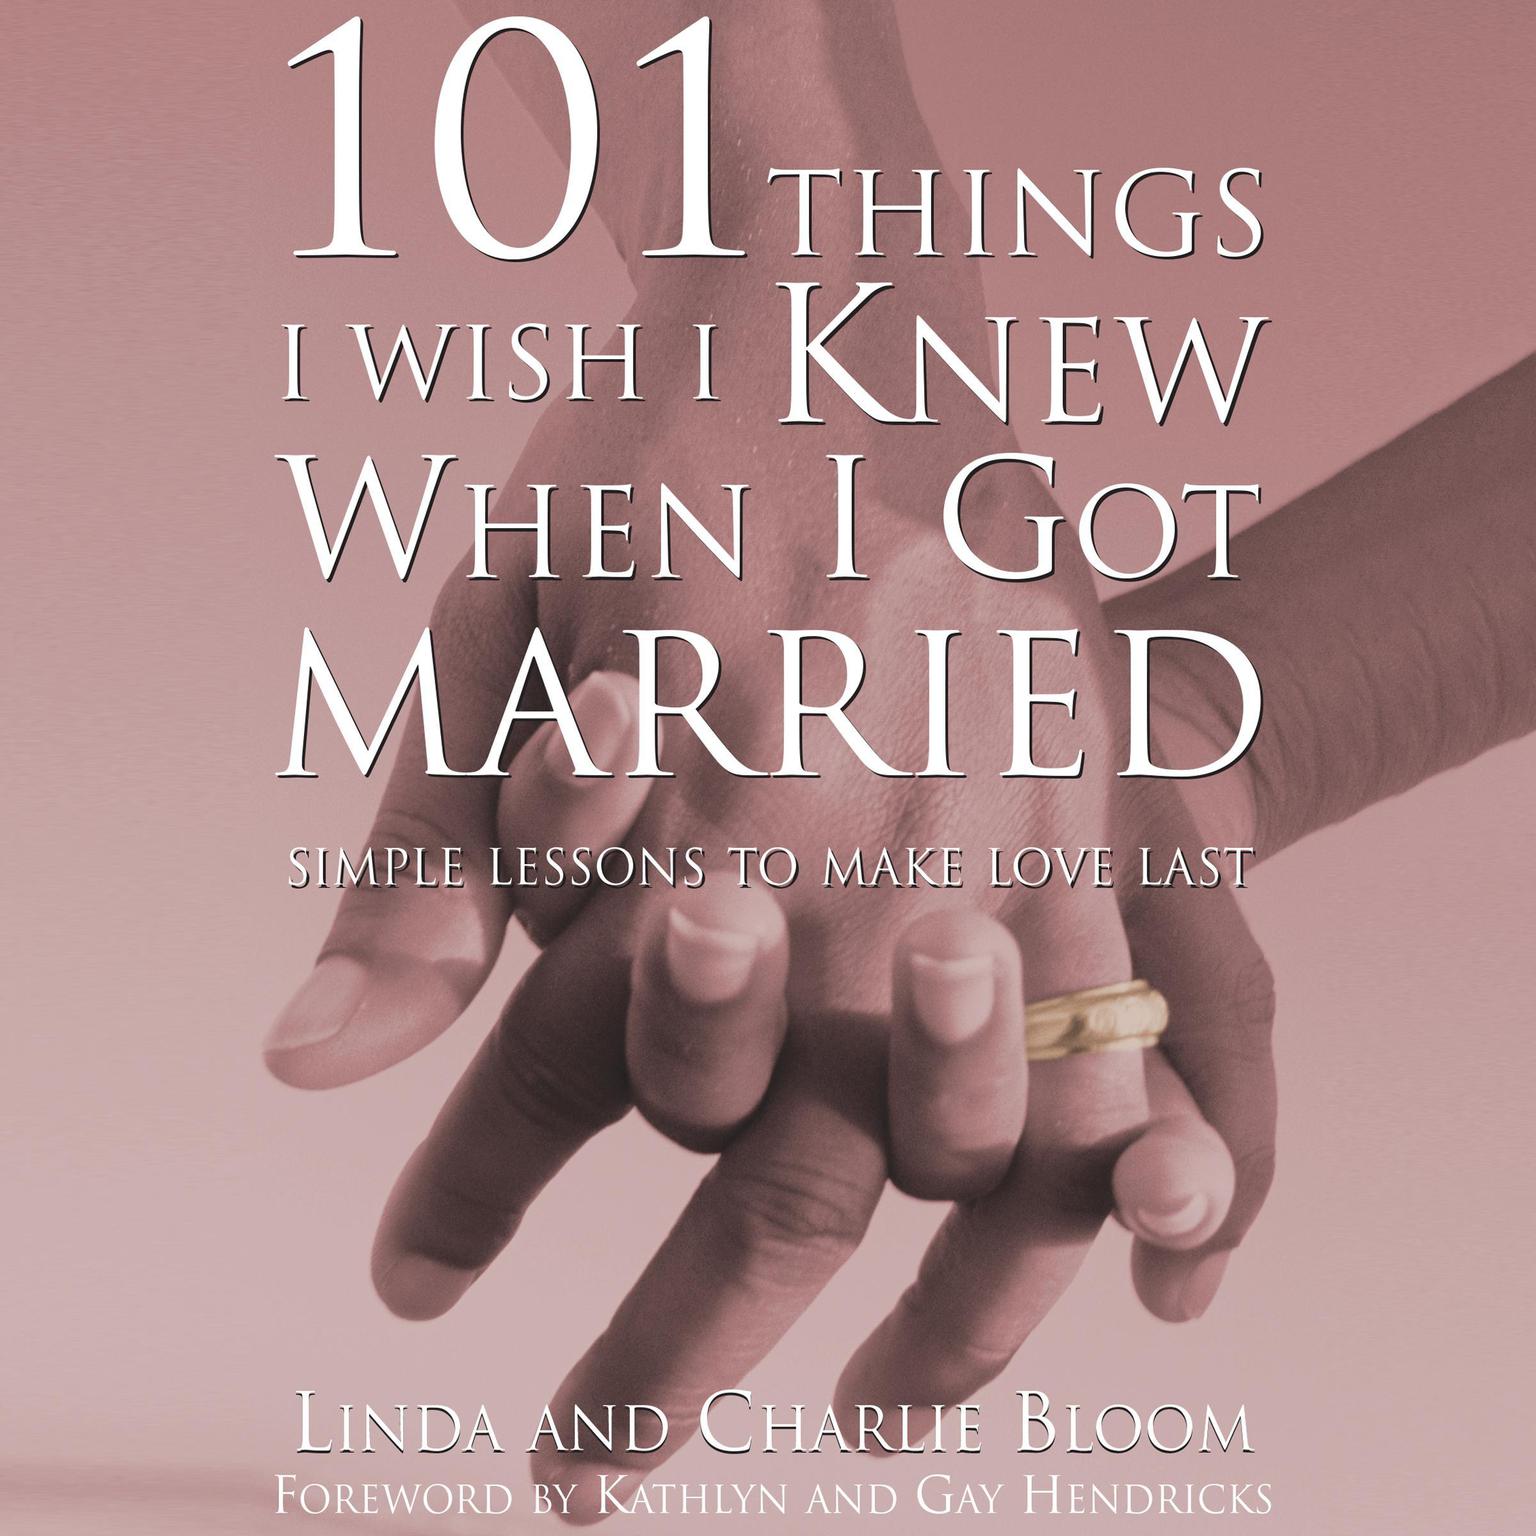 101 Things I Wish I Knew When I Got Married: Simple Lessons to Make Love Last Audiobook, by Charlie Bloom